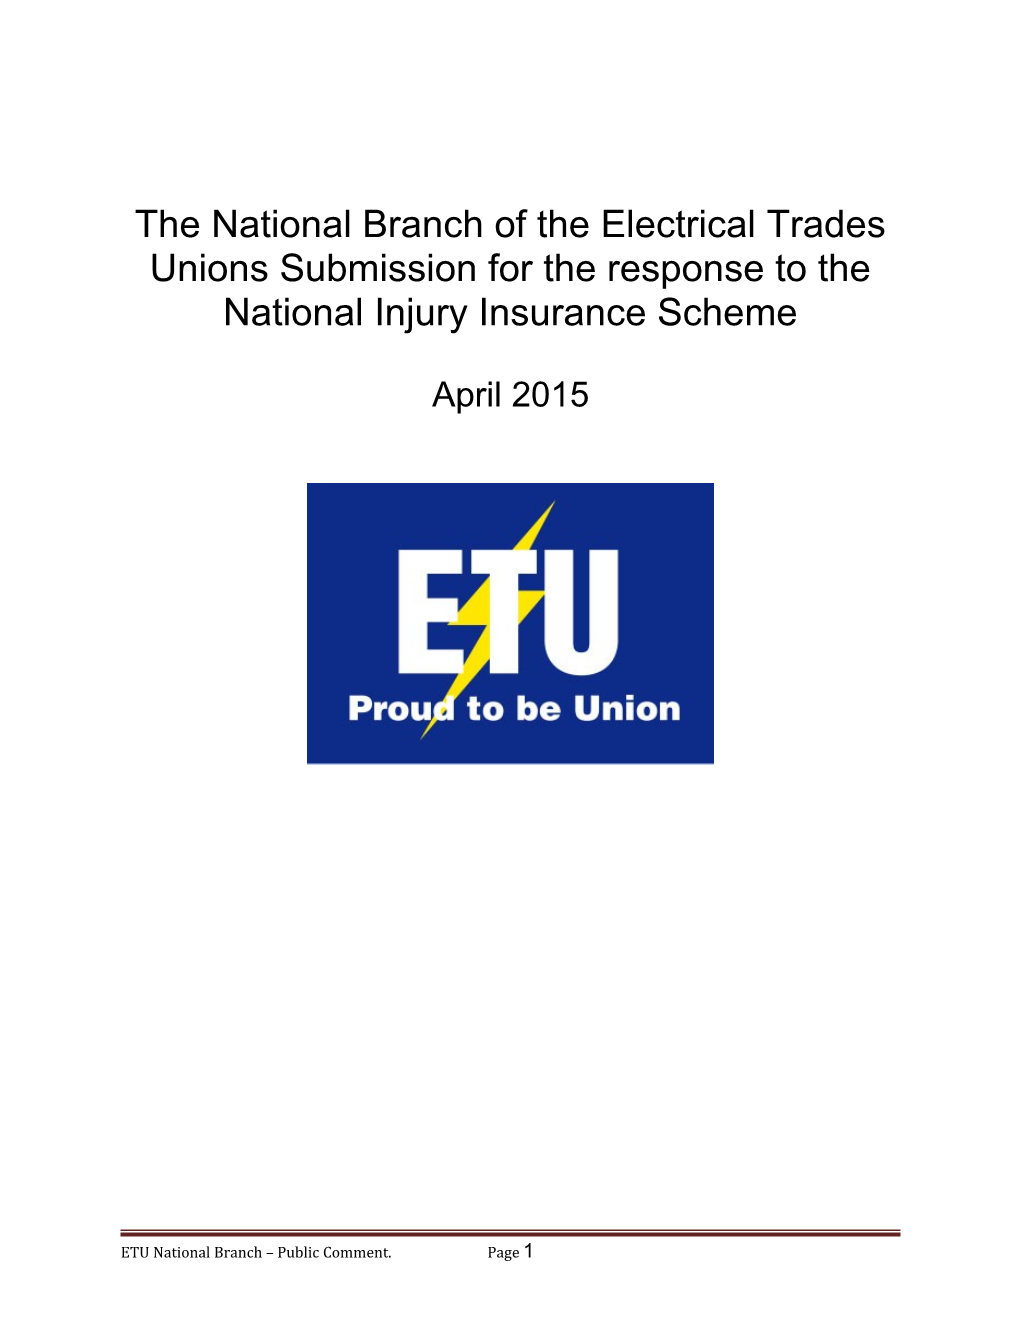 National Branch of the Electrical Trades Union - National Injury Insurance Scheme Workplace